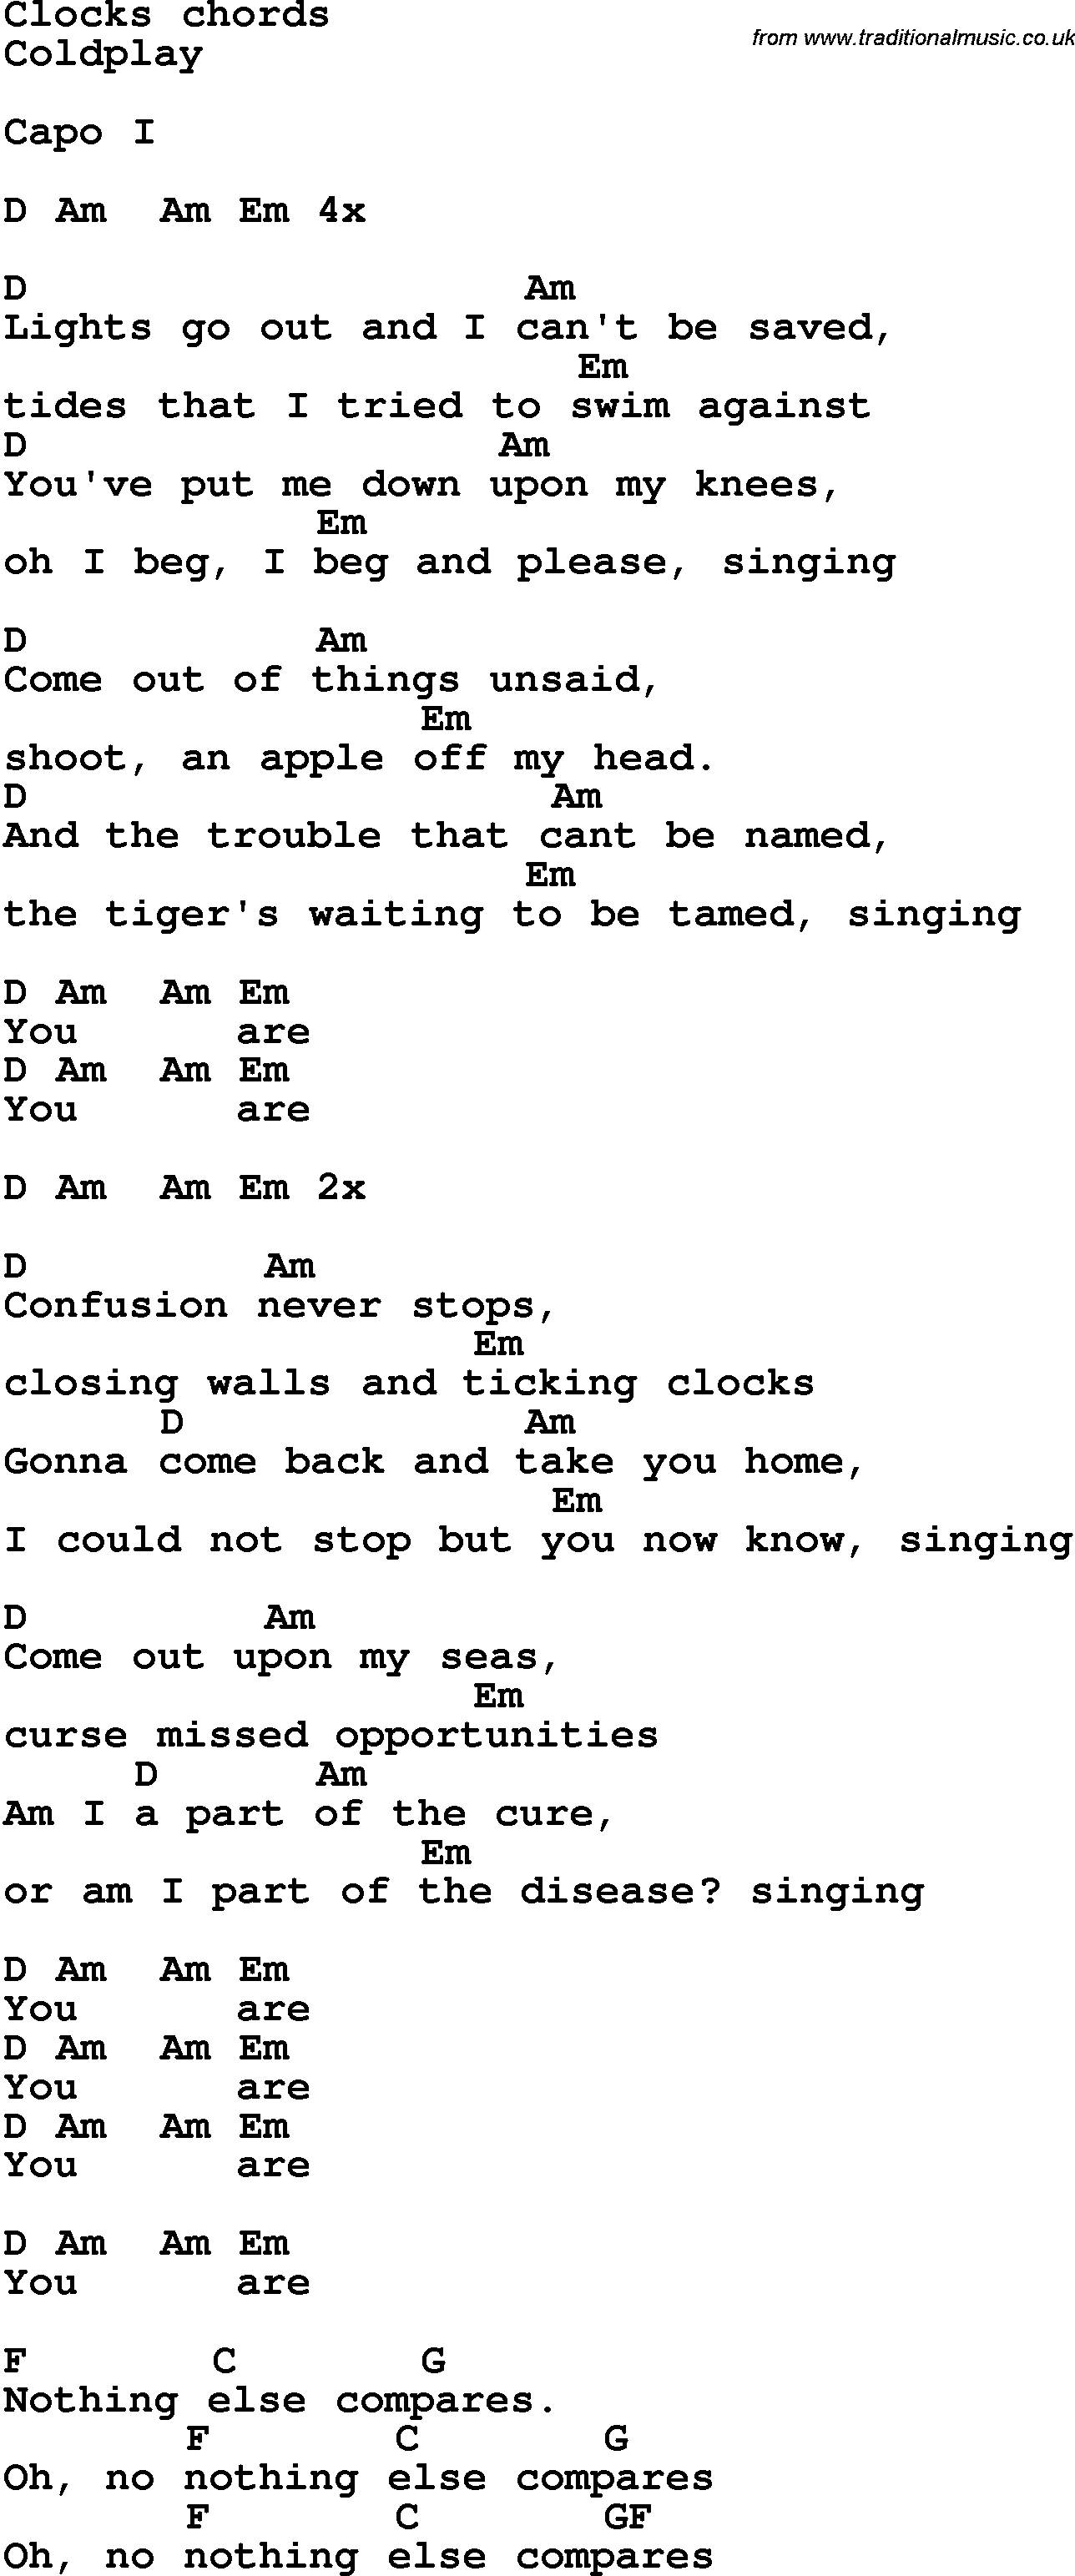 Song Lyrics with guitar chords for Clock's